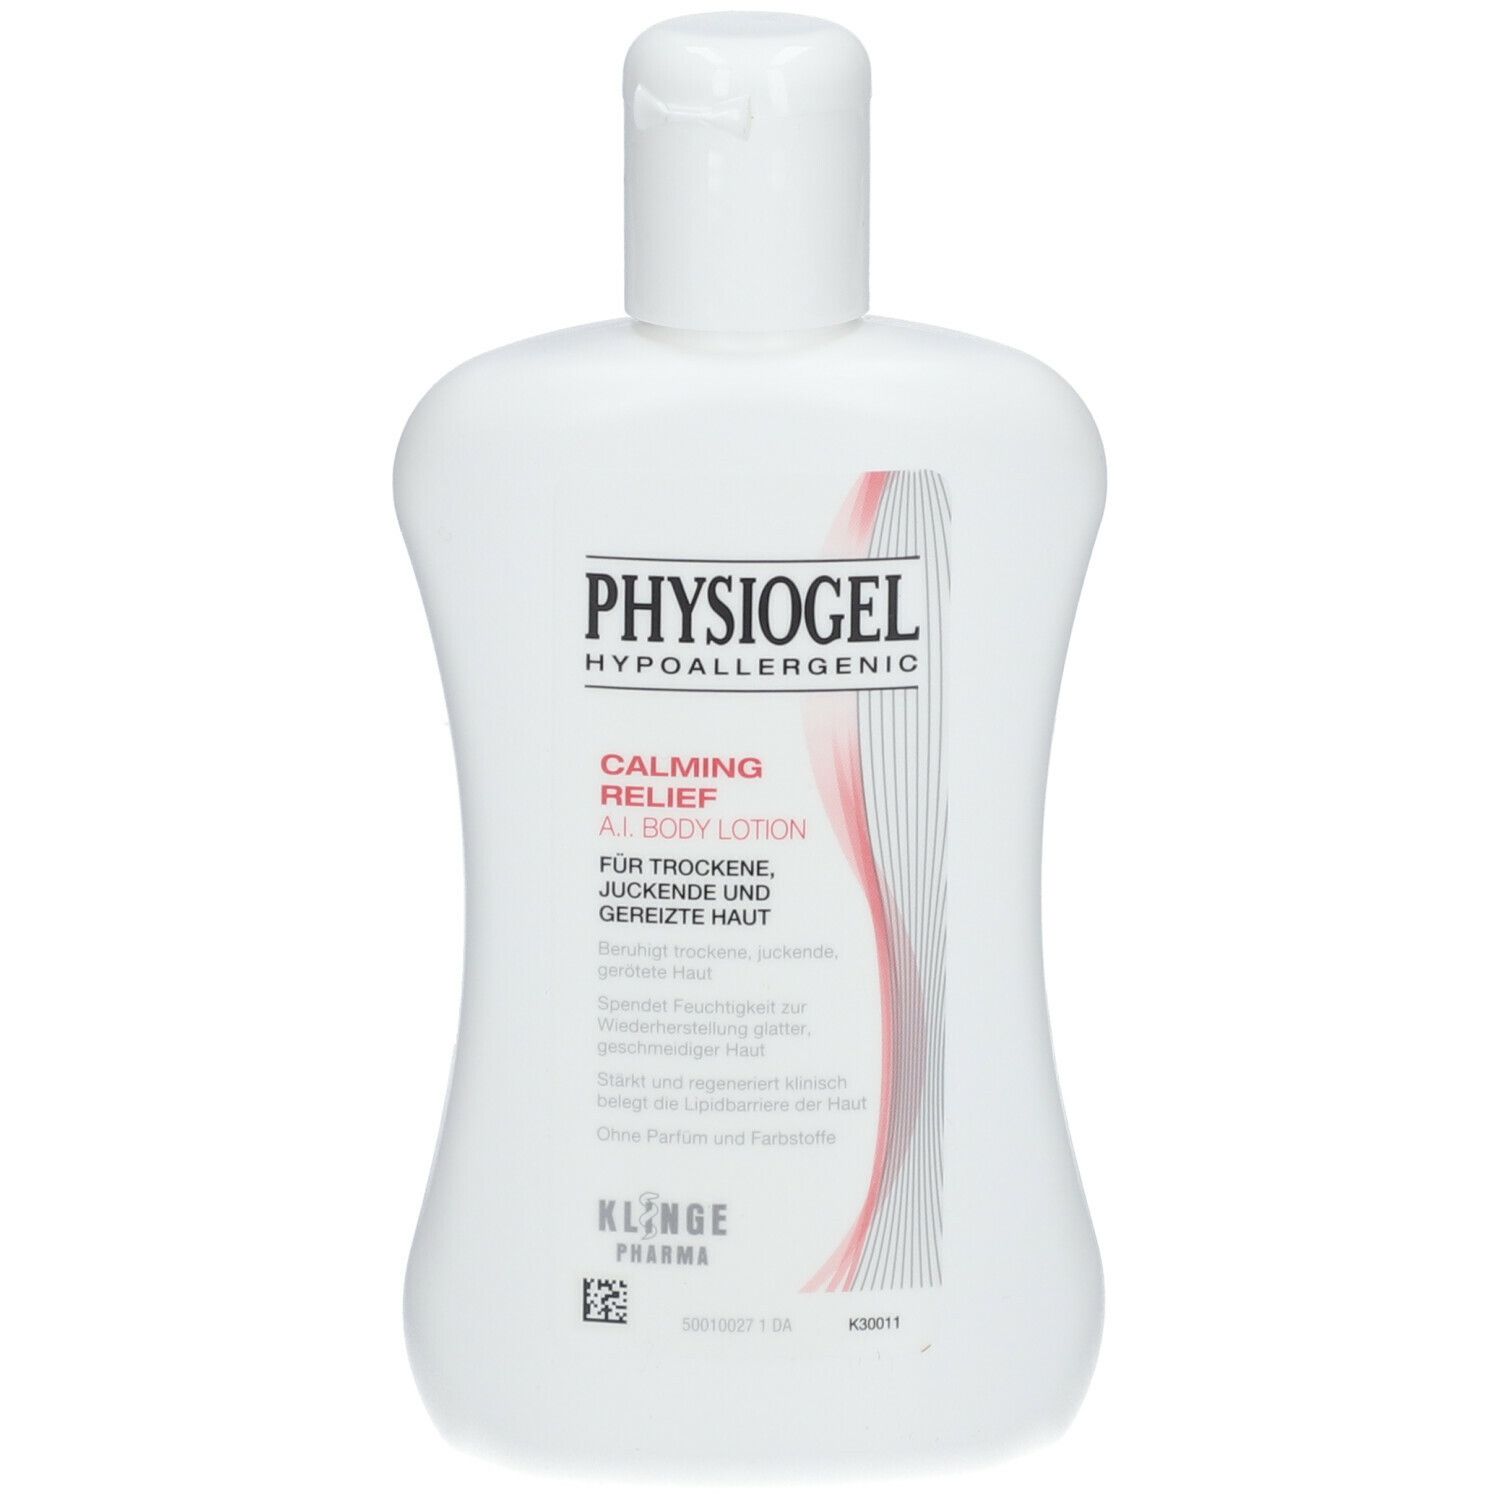 PHYSIOGEL® Calming Relief A.I. Body Lotion 200ml - irritierte Haut